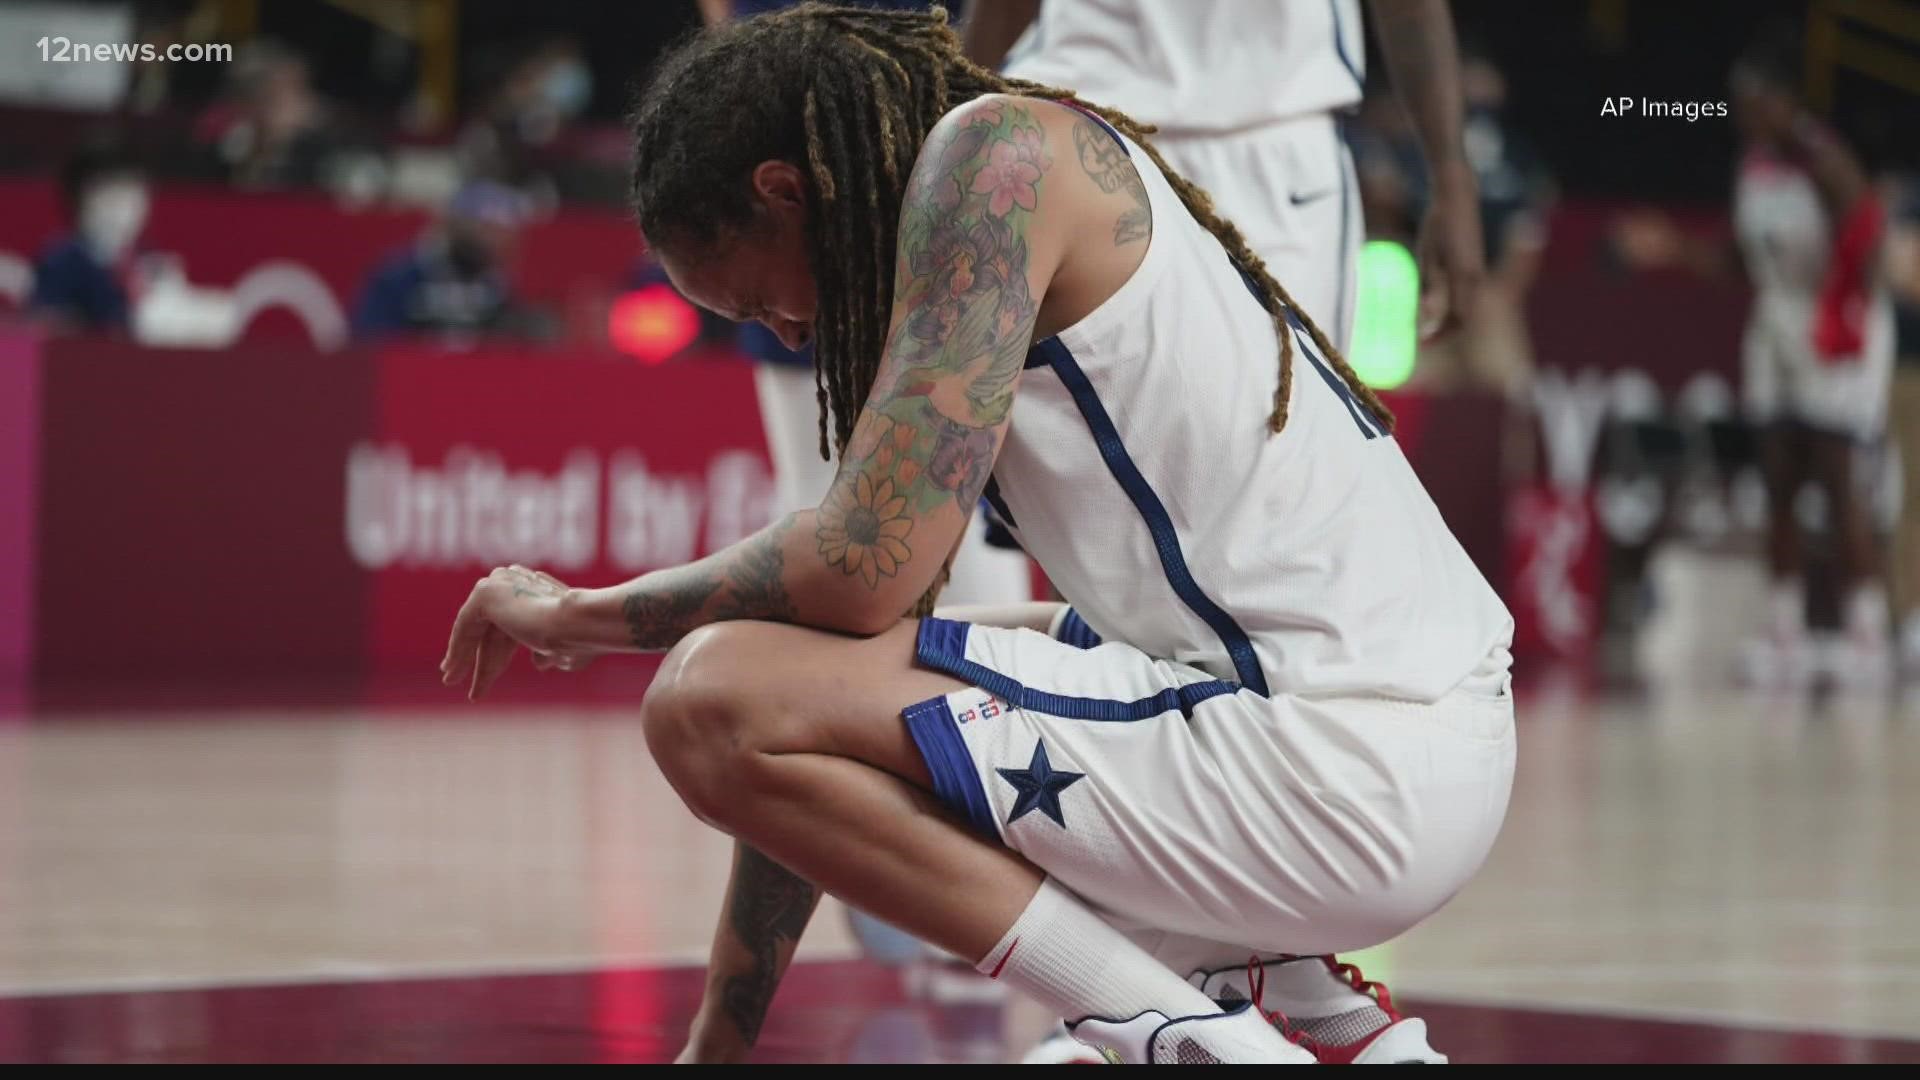 Griner was detained at a Moscow airport in February after Russian authorities said a search of her luggage revealed vape cartridges.